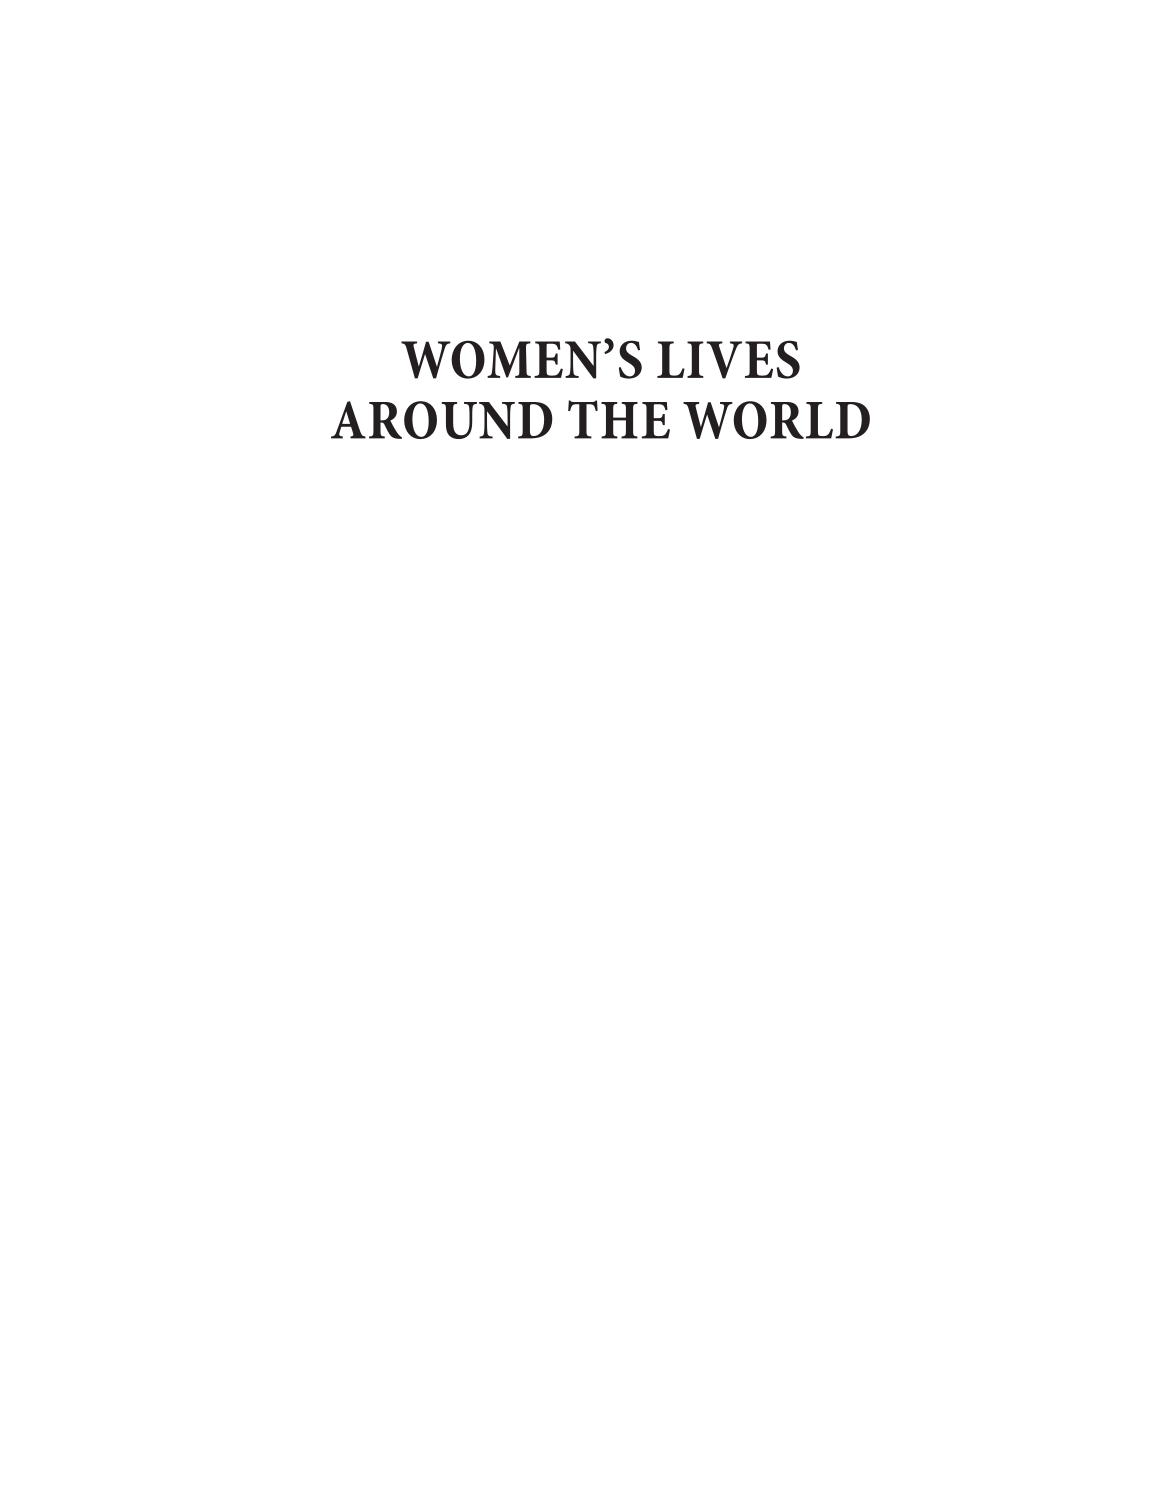 Women's Lives around the World: A Global Encyclopedia [4 volumes] page Vol-1:i